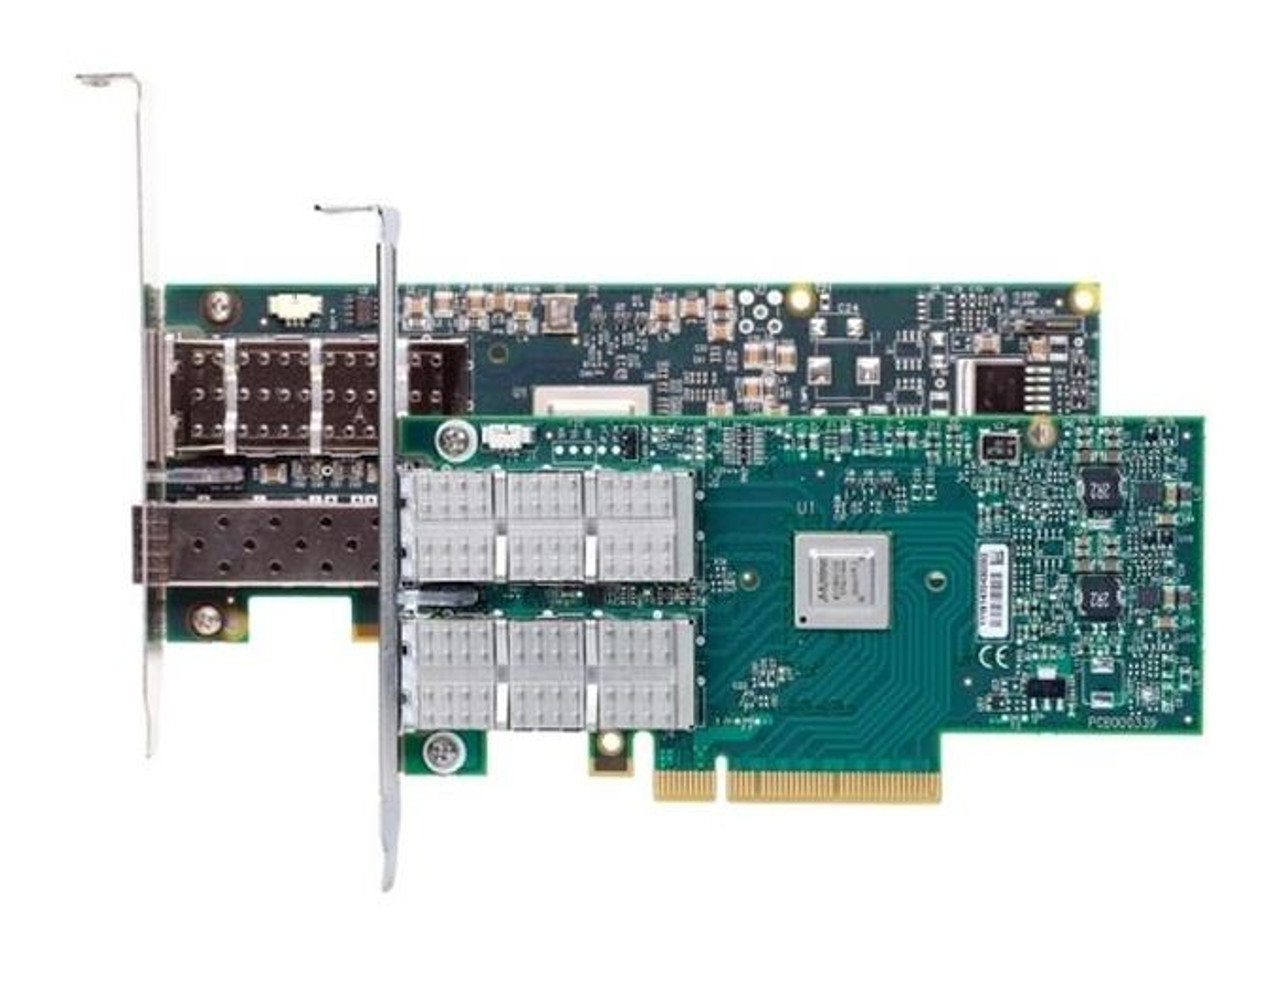 MCX354A-FCAT Mellanox ConnectX-3 Dual-Ports 56Gbps QSFP+ 10 Gigabit Ethernet PCI Express 3.0 x8 Network Adapter with VPI